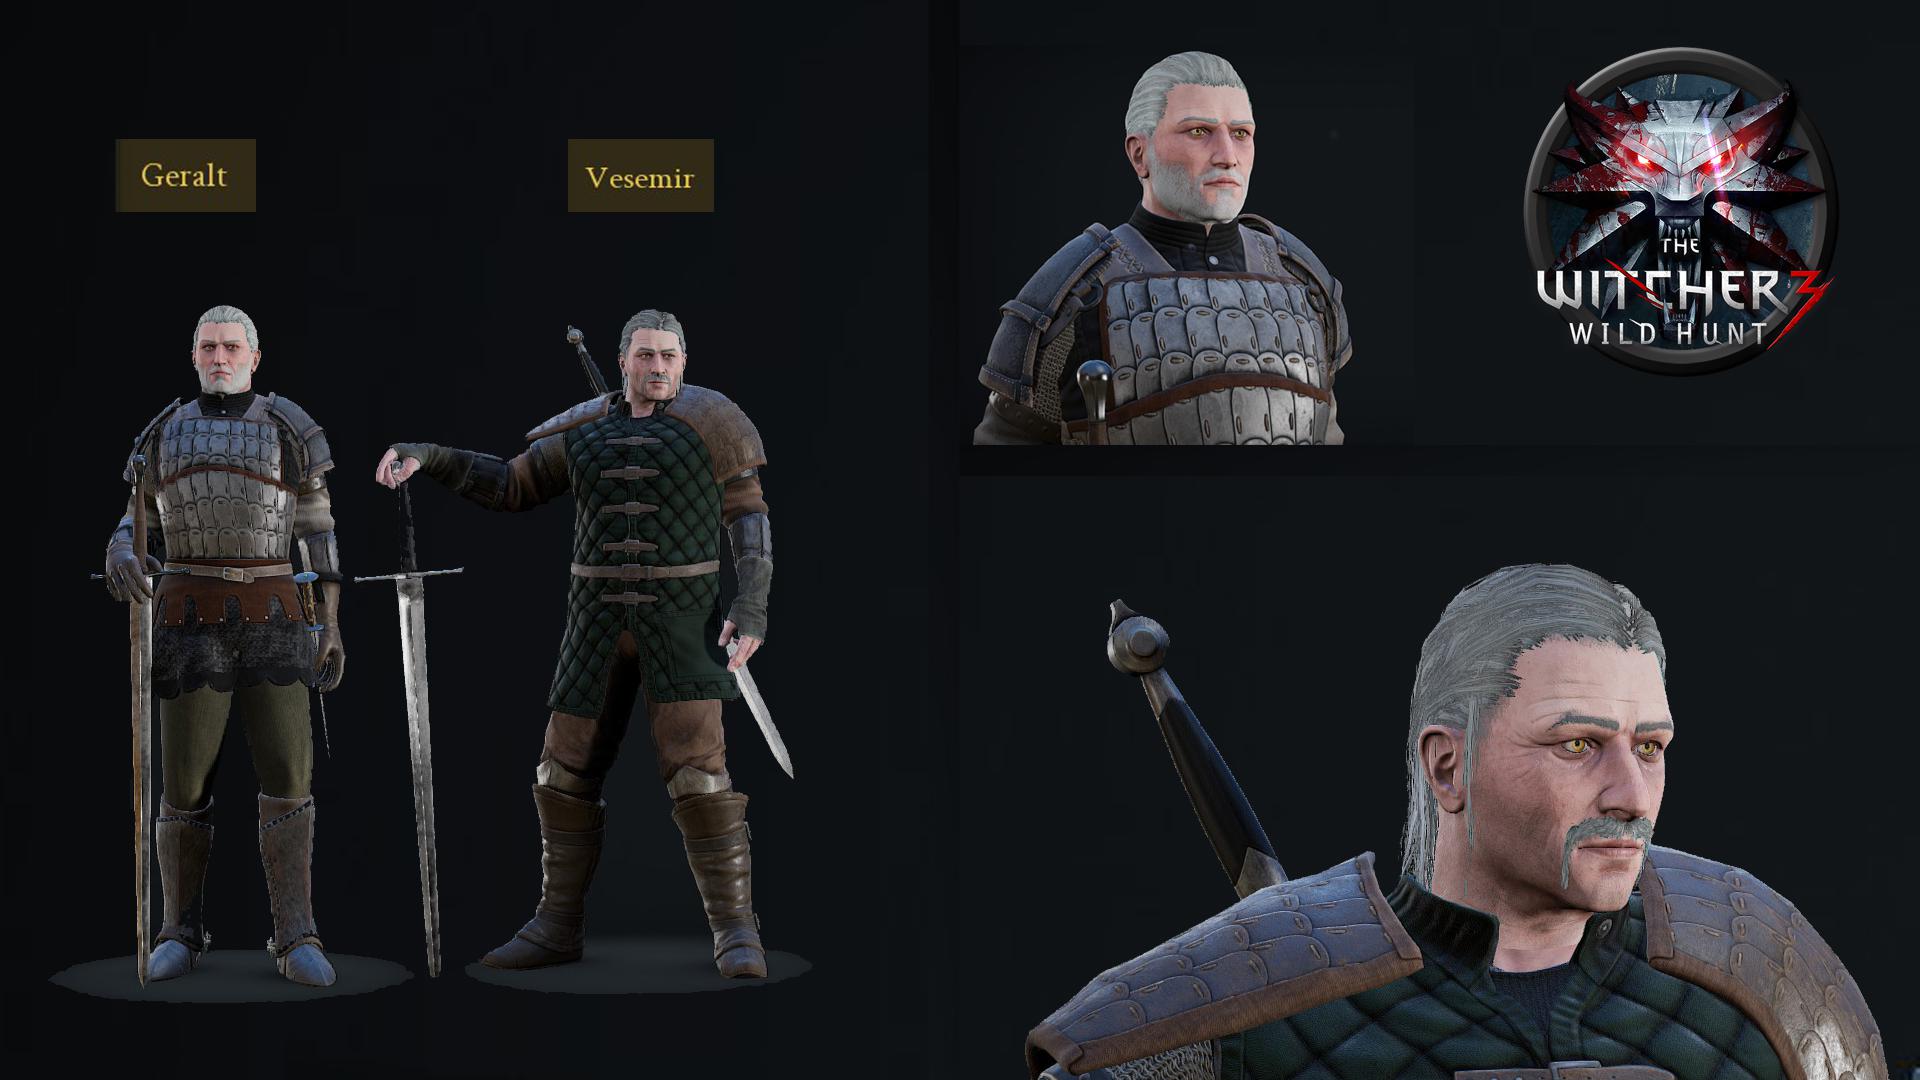 Geralt of Rivia and Vesemir from The Witcher 3